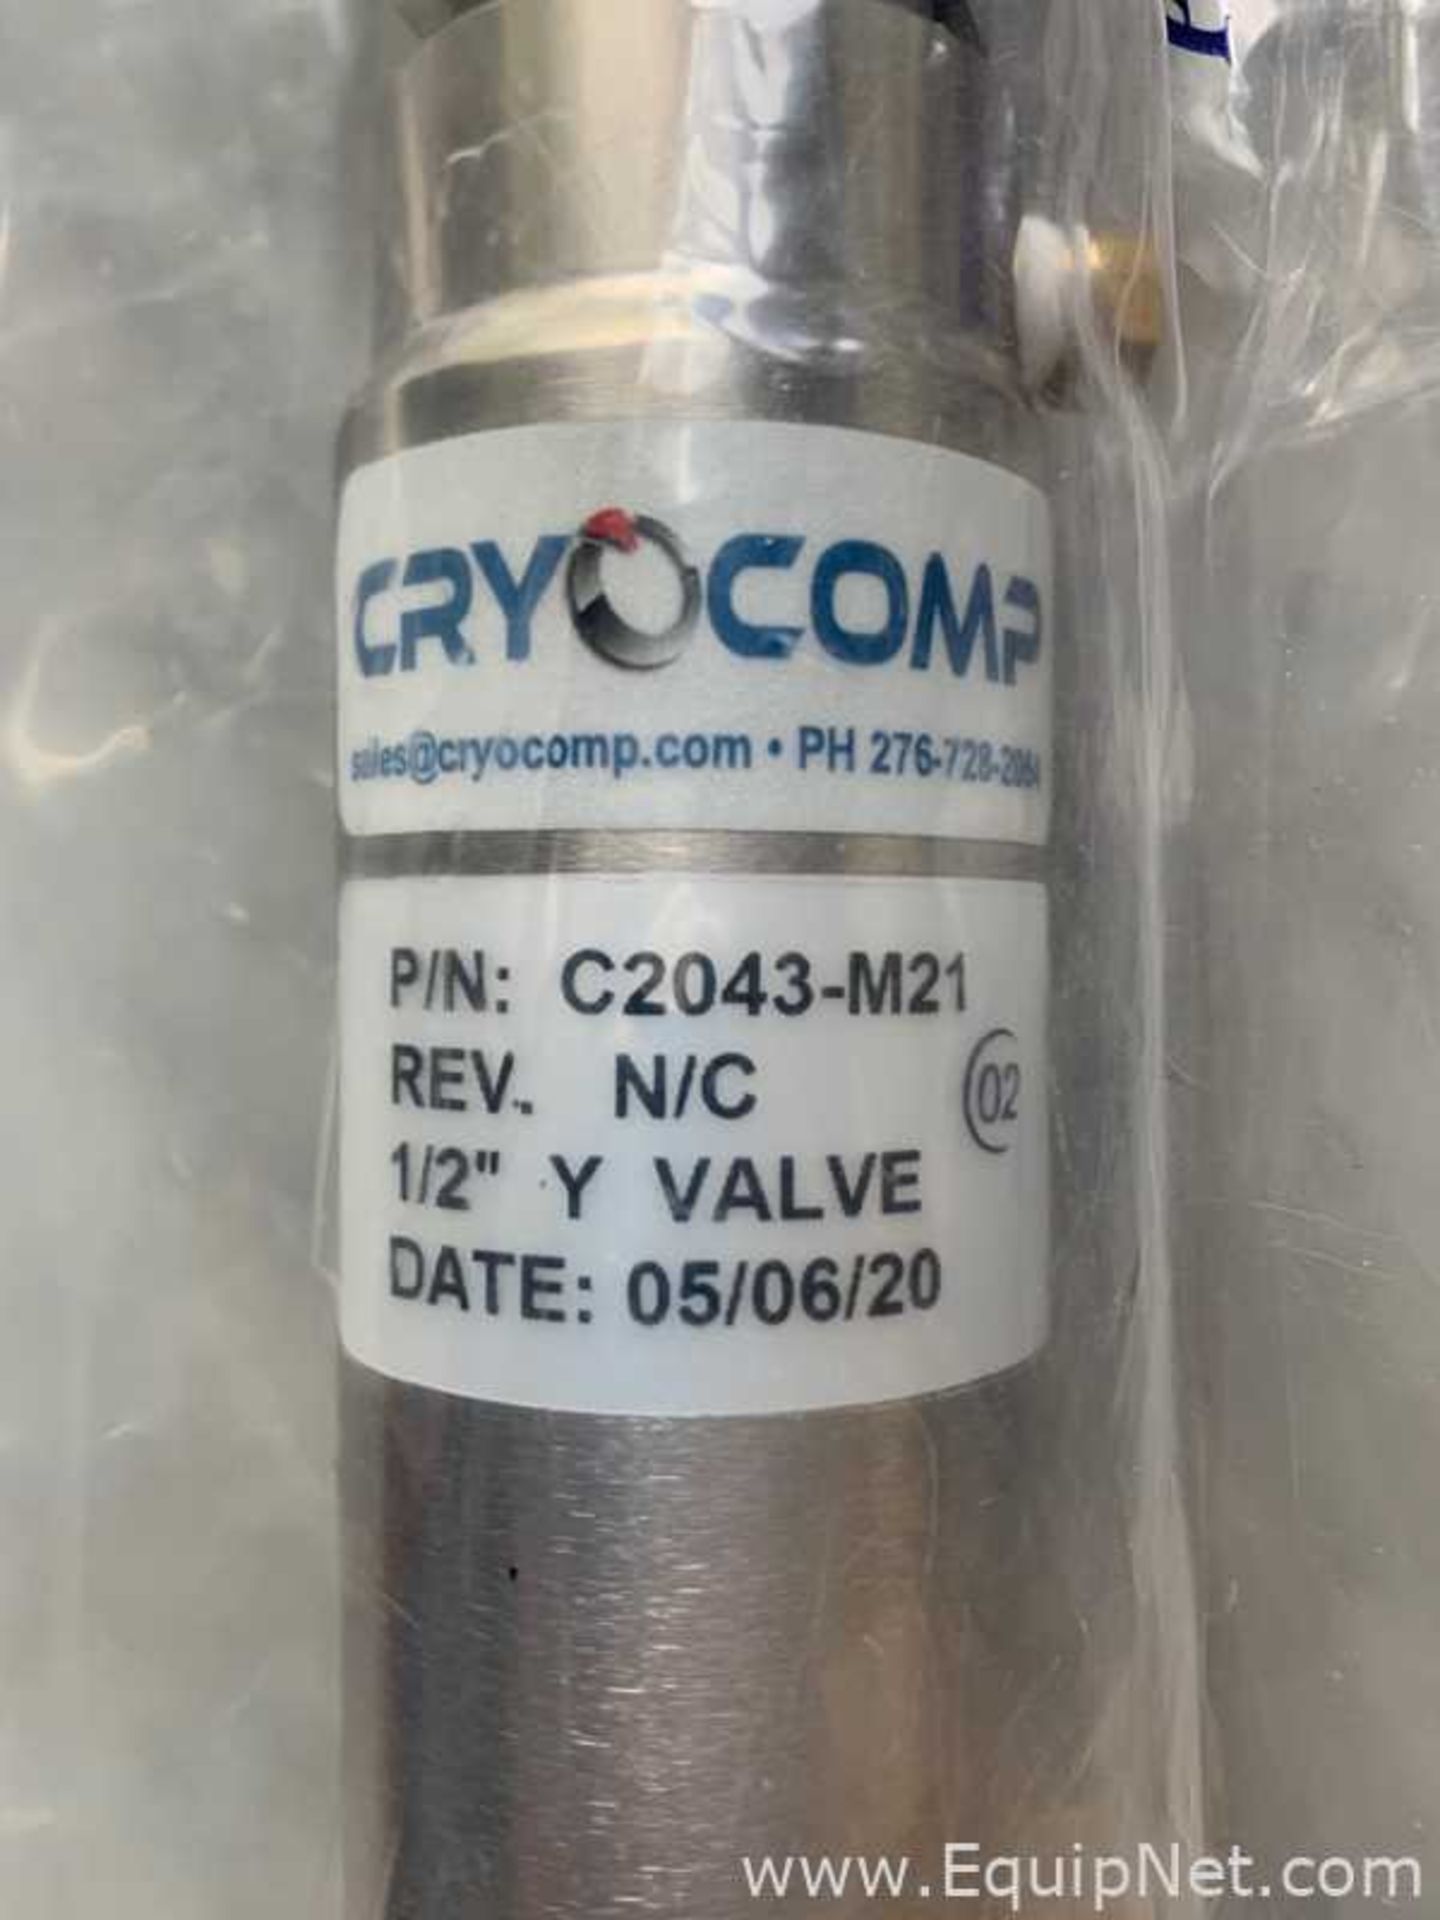 Lot of 15 CryComp C2403-M21 Valves